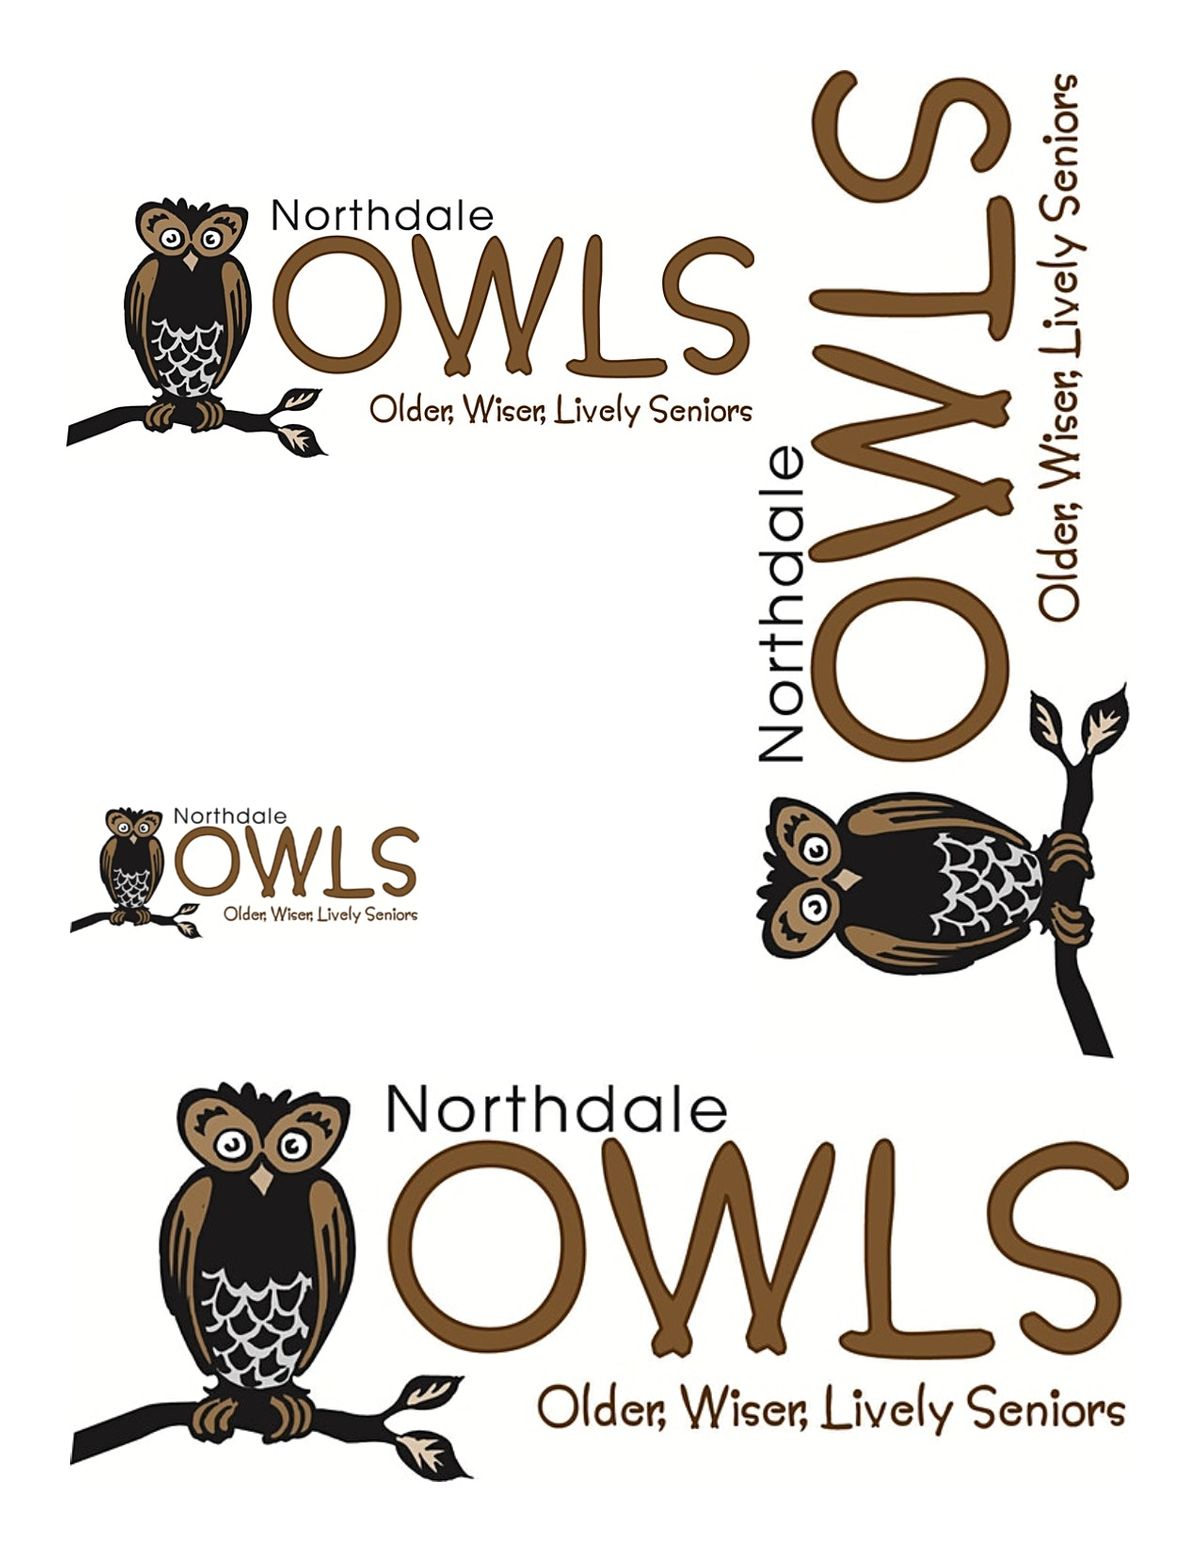 Northdale Owls Vendor Consecutive Meetings Payment 2021